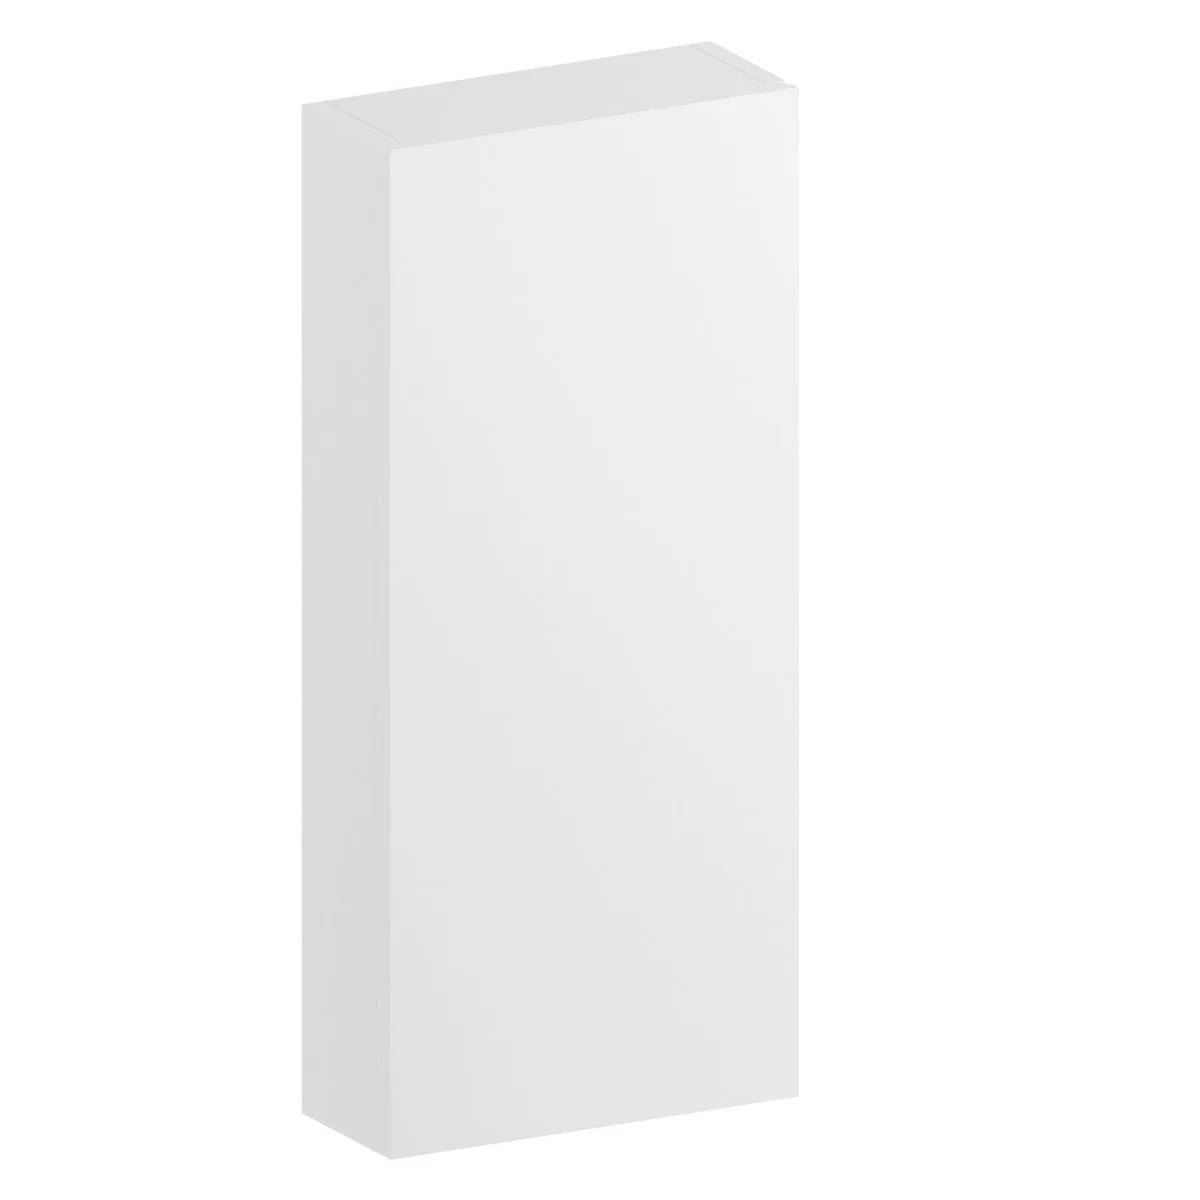 Accents Slimline white wall hung cabinet 650 x 300mm